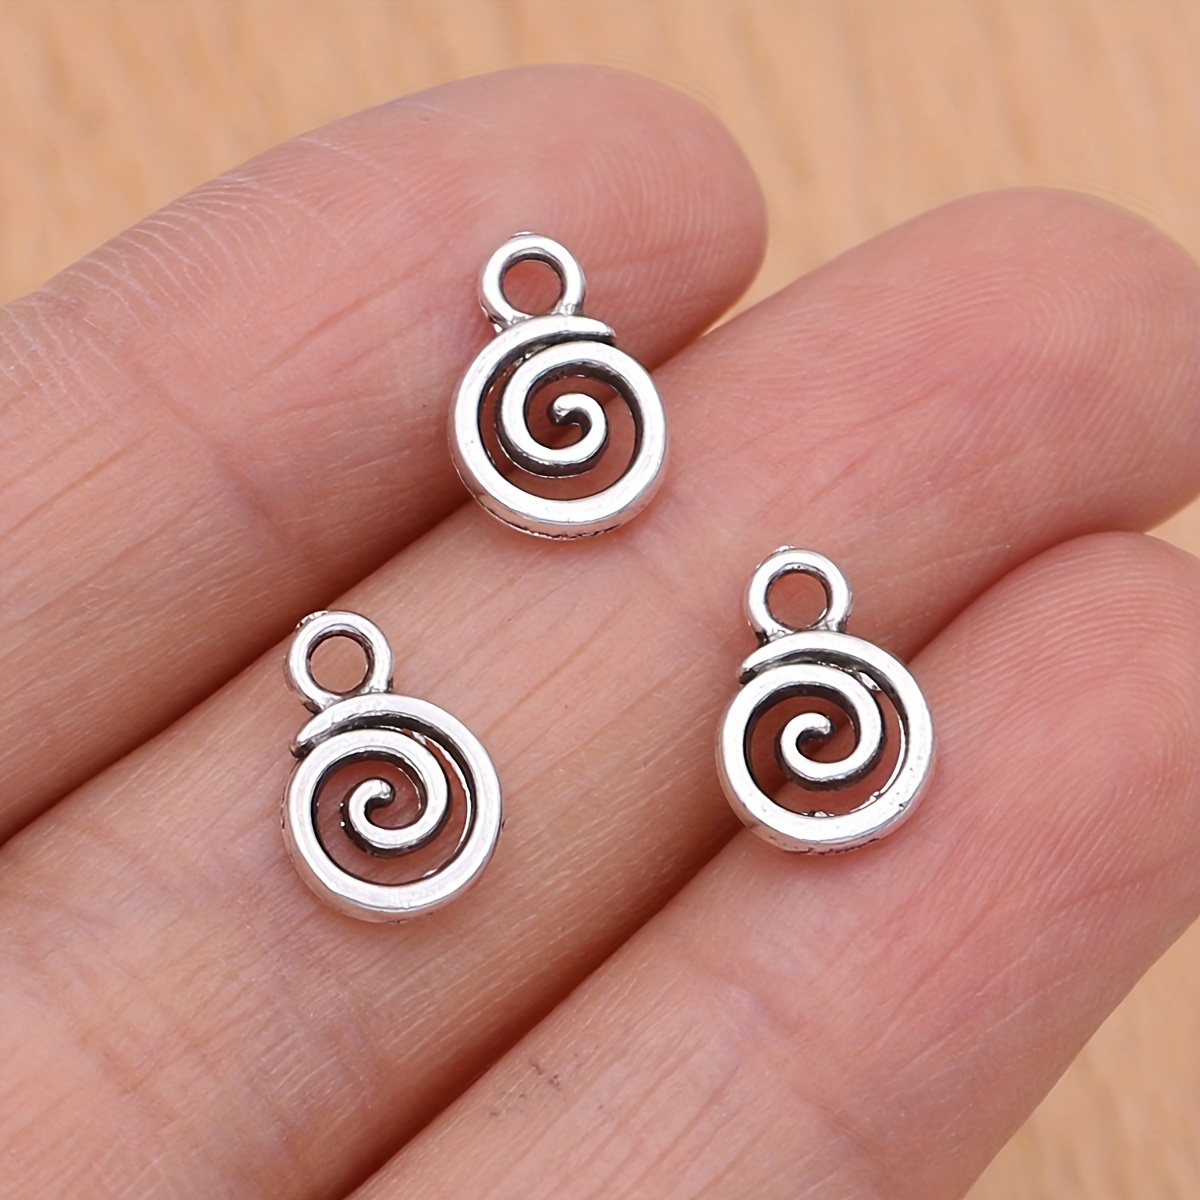 10 Spiral Swirl Circles Tiny Charm for Bracelet/Earrings/Necklace Pendant  Silver